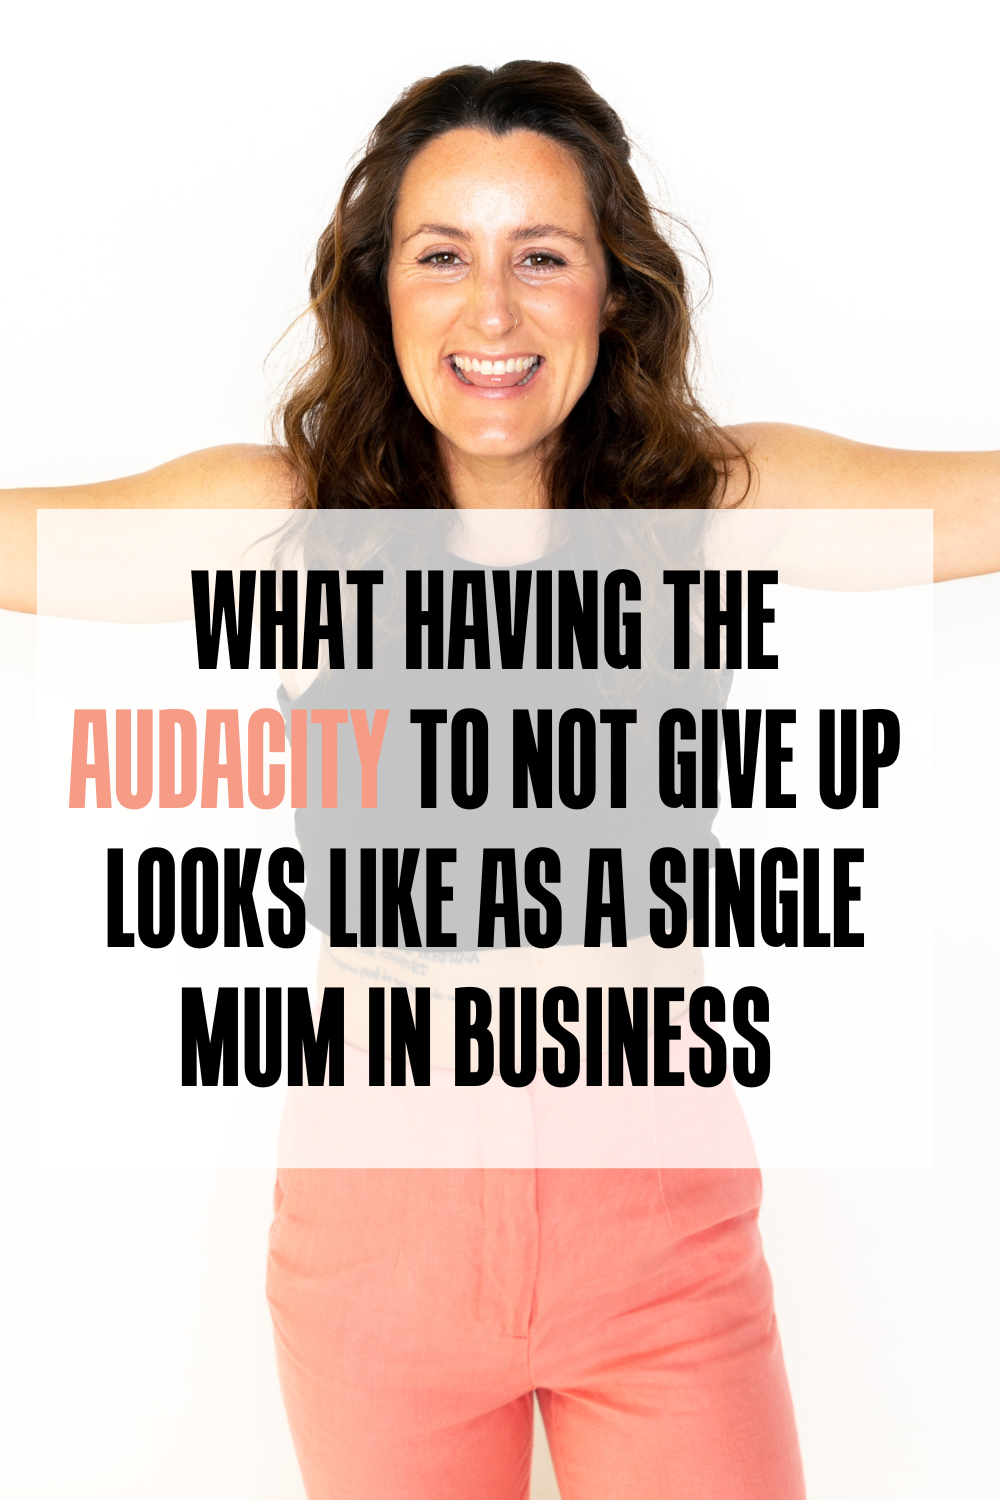 WHAT HAVING THE AUDACITY TO NOT GIVE UP LOOKS LIKE AS A SINGLE MUM IN BUSINESS